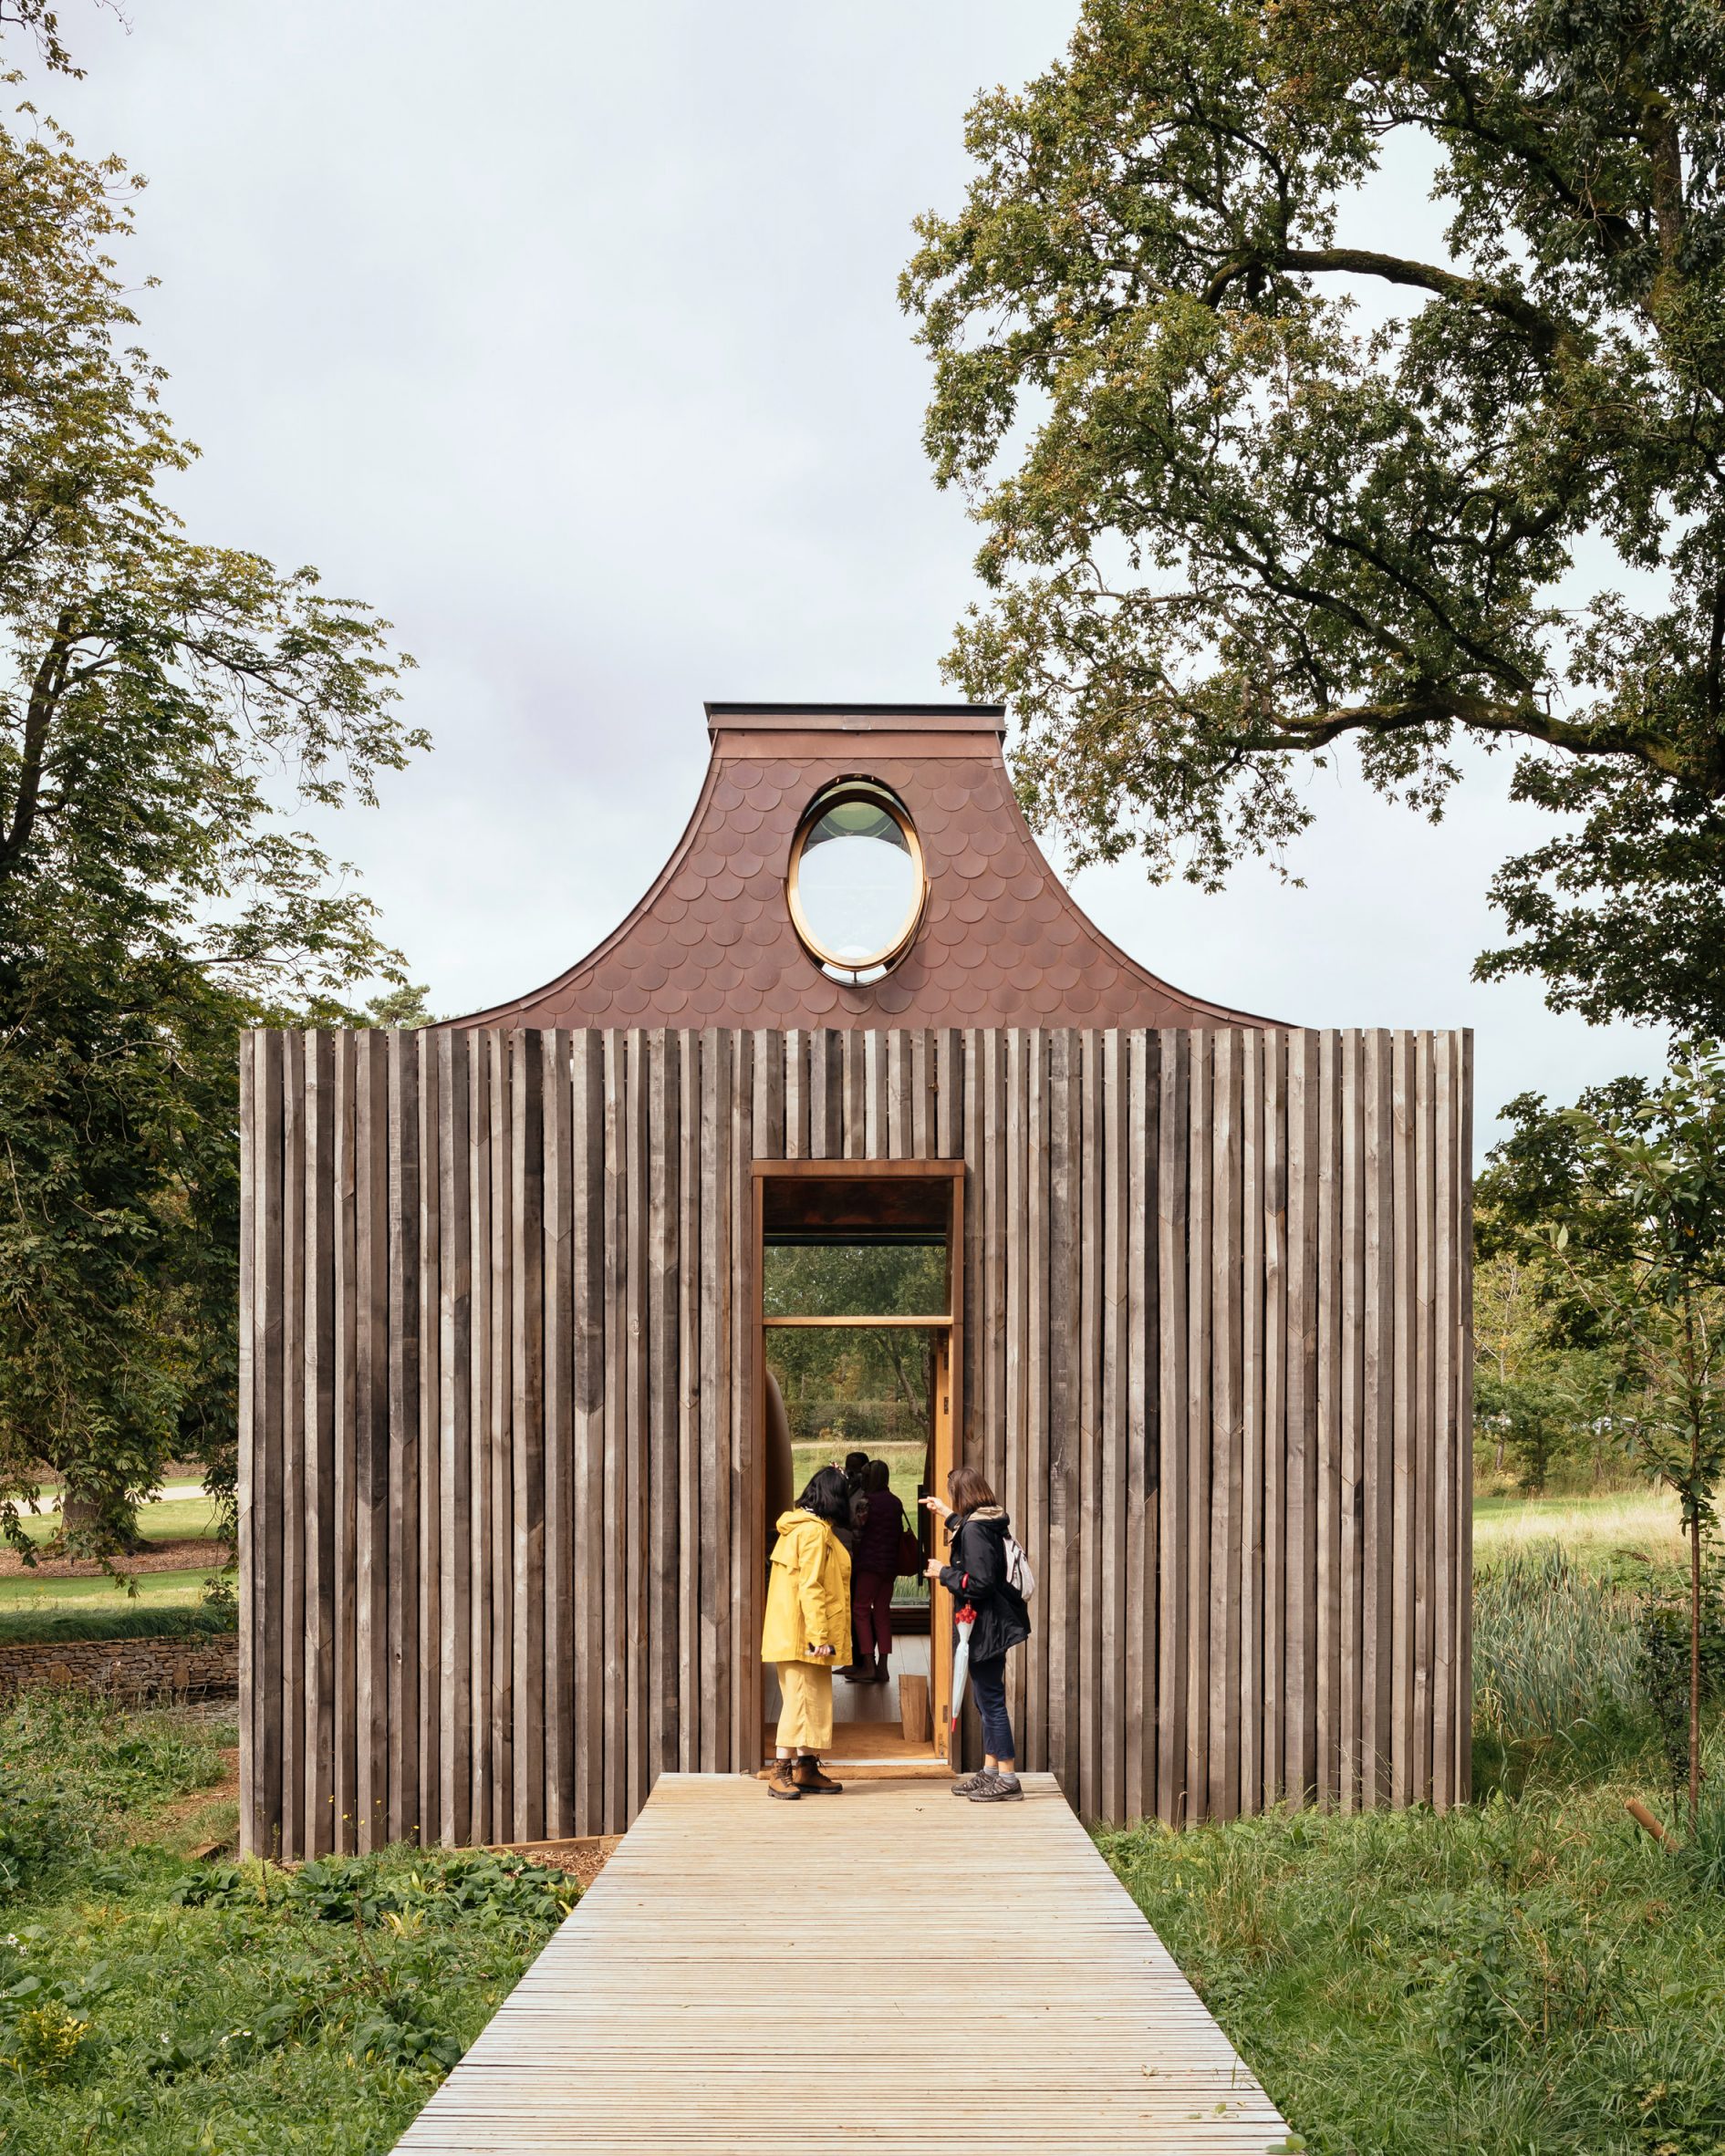 Entrance to The Beezantium by Invisible Studio at The Newt in Somerset